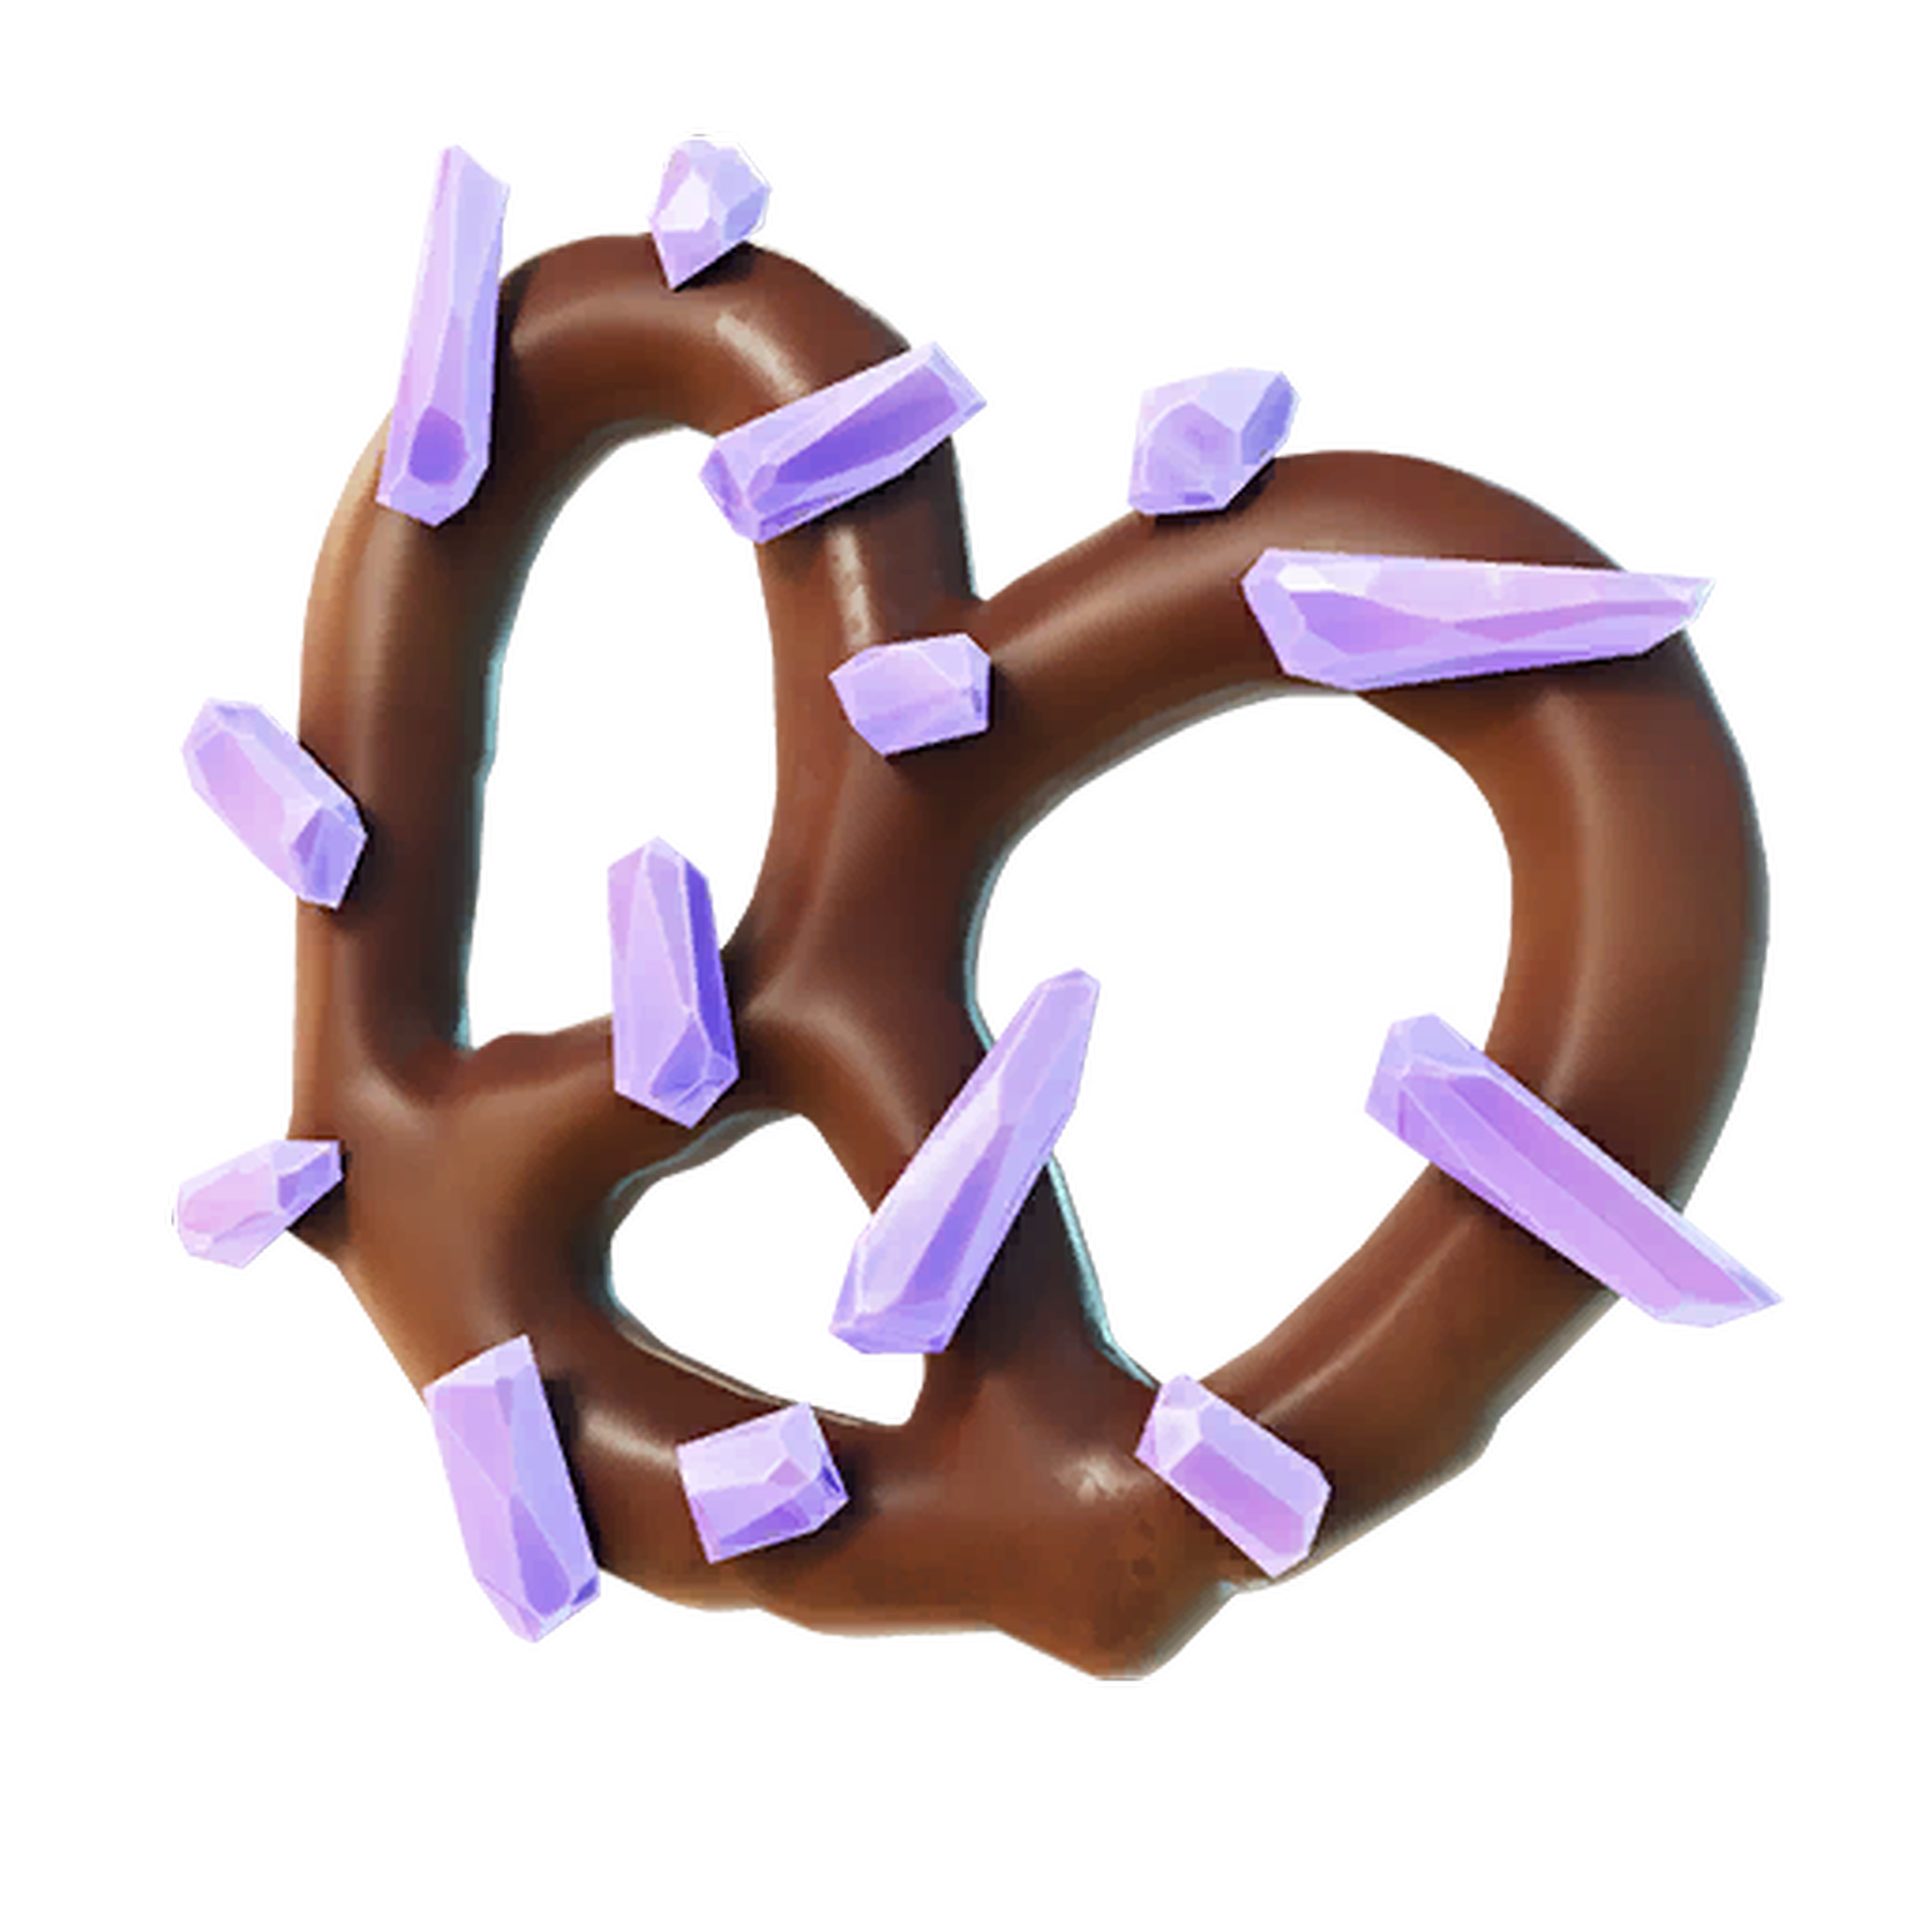 How to acquire the Zero Point Pretzel Effect in Fortnite Chapter 3 Season 4?